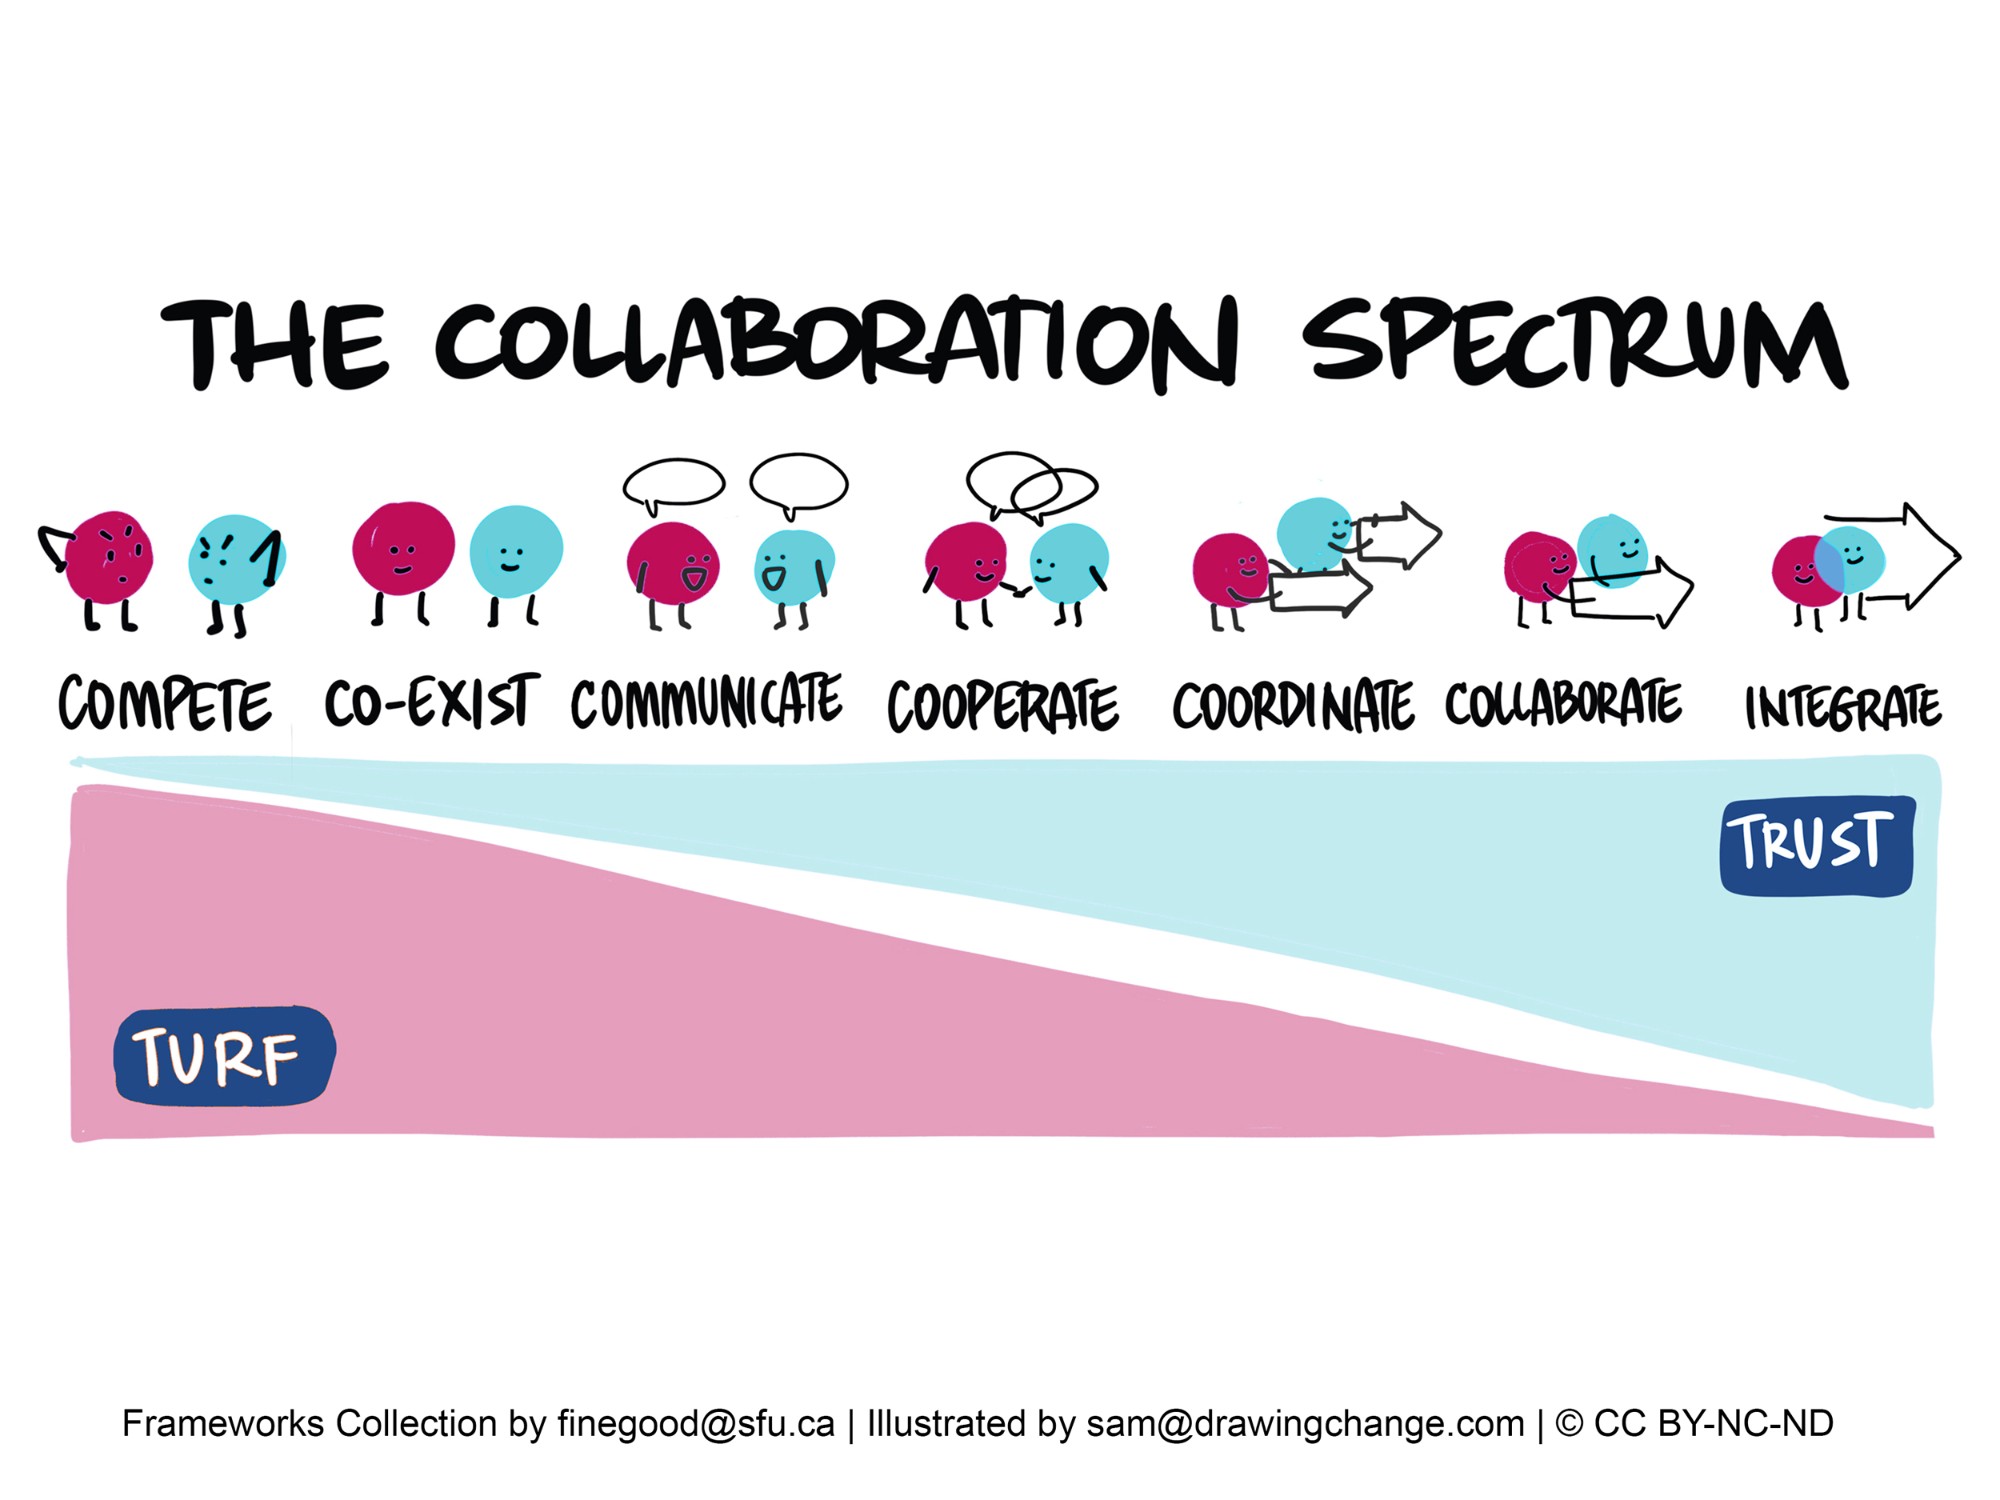 The image presents a colorful diagram titled "THE COLLABORATION SPECTRUM." It's a visual representation of various stages of working together, ranging from competition to integration. Along the bottom is a gradient, with "TURF" on the left, represented by a dark pink color, and "TRUST" on the right, fading into a light blue. The gradient suggests that moving from left to right on the spectrum corresponds to increasing levels of trust.  There are seven stages depicted, each with a pair of anthropomorphized circles representing people or entities. From left to right:  1. COMPETE: Two characters with angry expressions and crossed arms facing away from each other, symbolizing opposition. 2. CO-EXIST: Two characters standing apart, neutral expressions, looking forward with no interaction, representing tolerance without cooperation. 3. COMMUNICATE: Two characters facing each other with small speech bubbles, indicating the beginning of interaction. 4. COOPERATE: Two characters working together, each contributing an object to a shared pile, showing basic collaboration. 5. COORDINATE: Two characters, each holding the end of an arrow, aligning their directions, symbolizing organized efforts. 6. COLLABORATE: Two characters holding a banner between them, demonstrating a shared goal and partnership. 7. INTEGRATE: Two characters merging arrows into one, showing a complete and seamless integration of efforts.  The illustration has a playful and accessible style, aiming to convey the concept of collaboration in a simple and engaging manner. It's attributed to a "Frameworks Collection" by finegood@sfu.ca and illustrated by sam@drawingchange.com, with a Creative Commons license: CC BY-NC-ND.